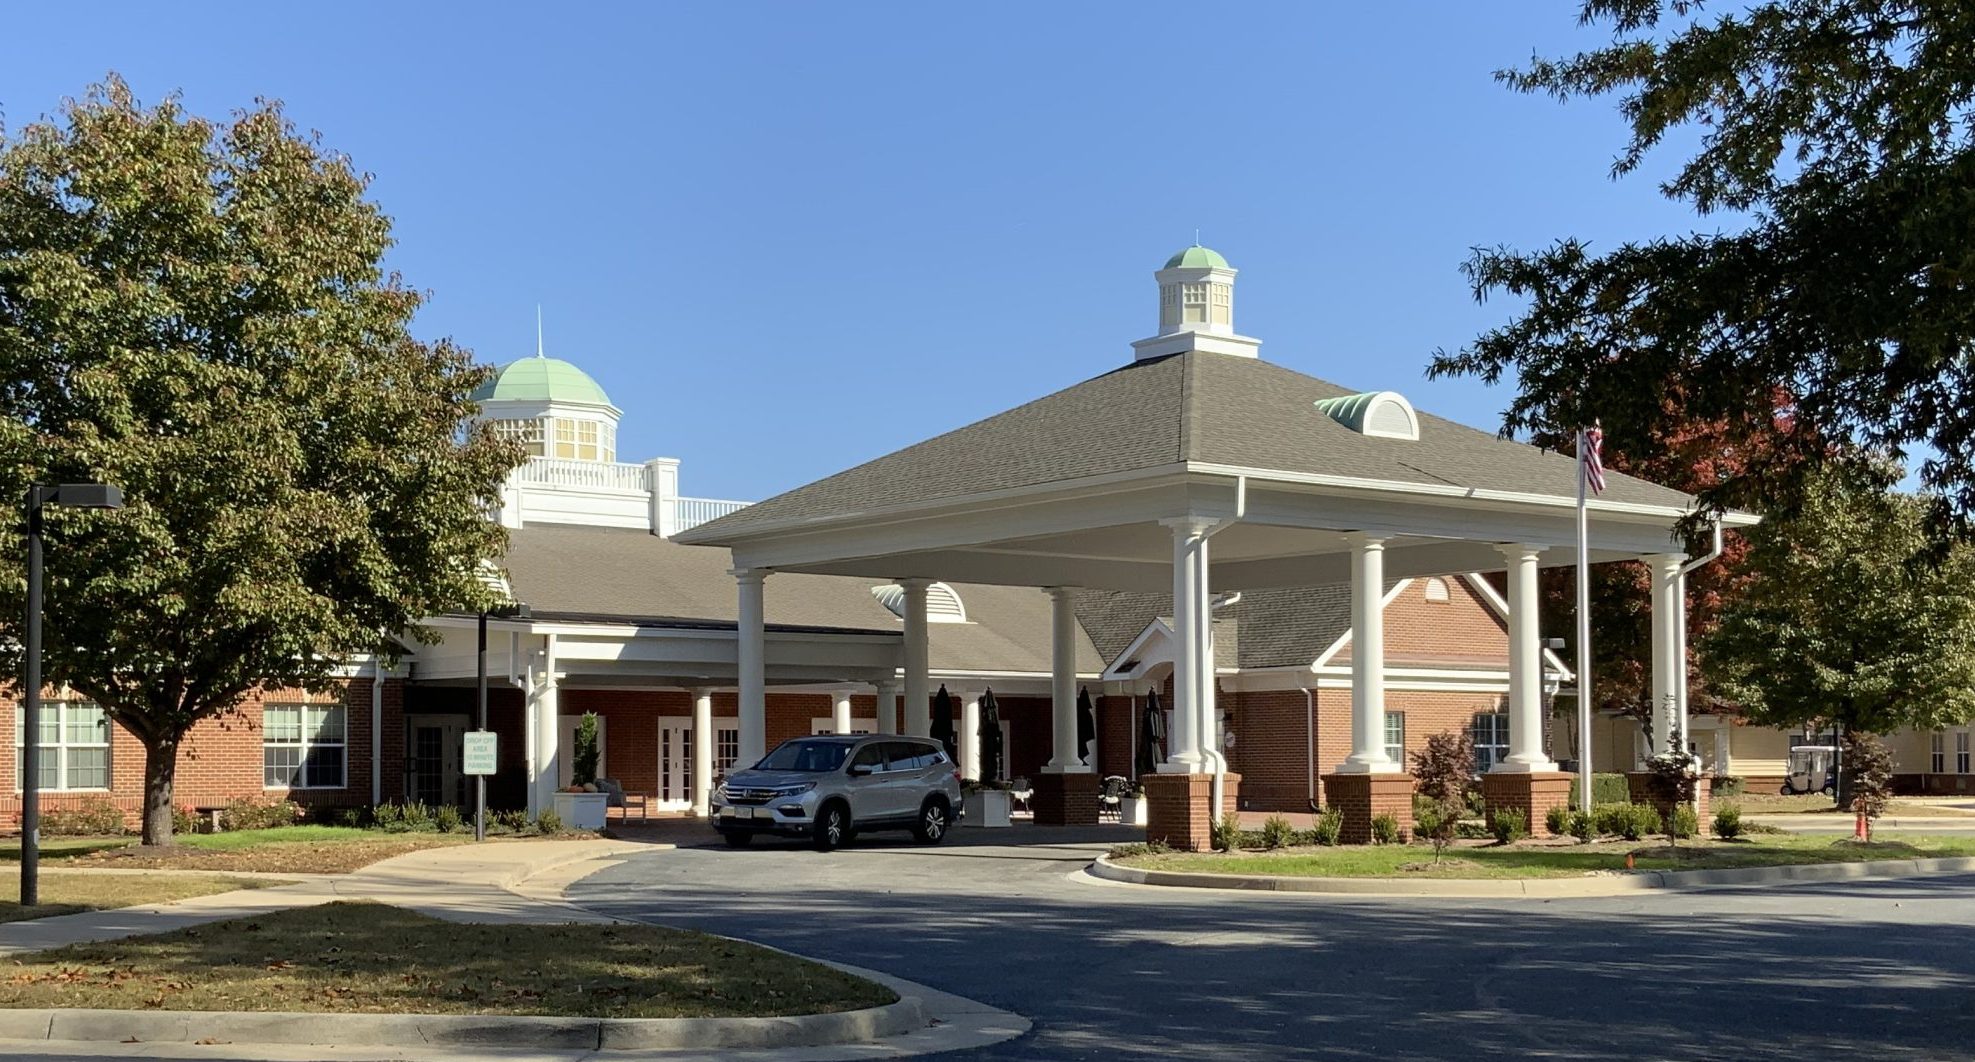 porte-cochere with white columns in front of brick buildign